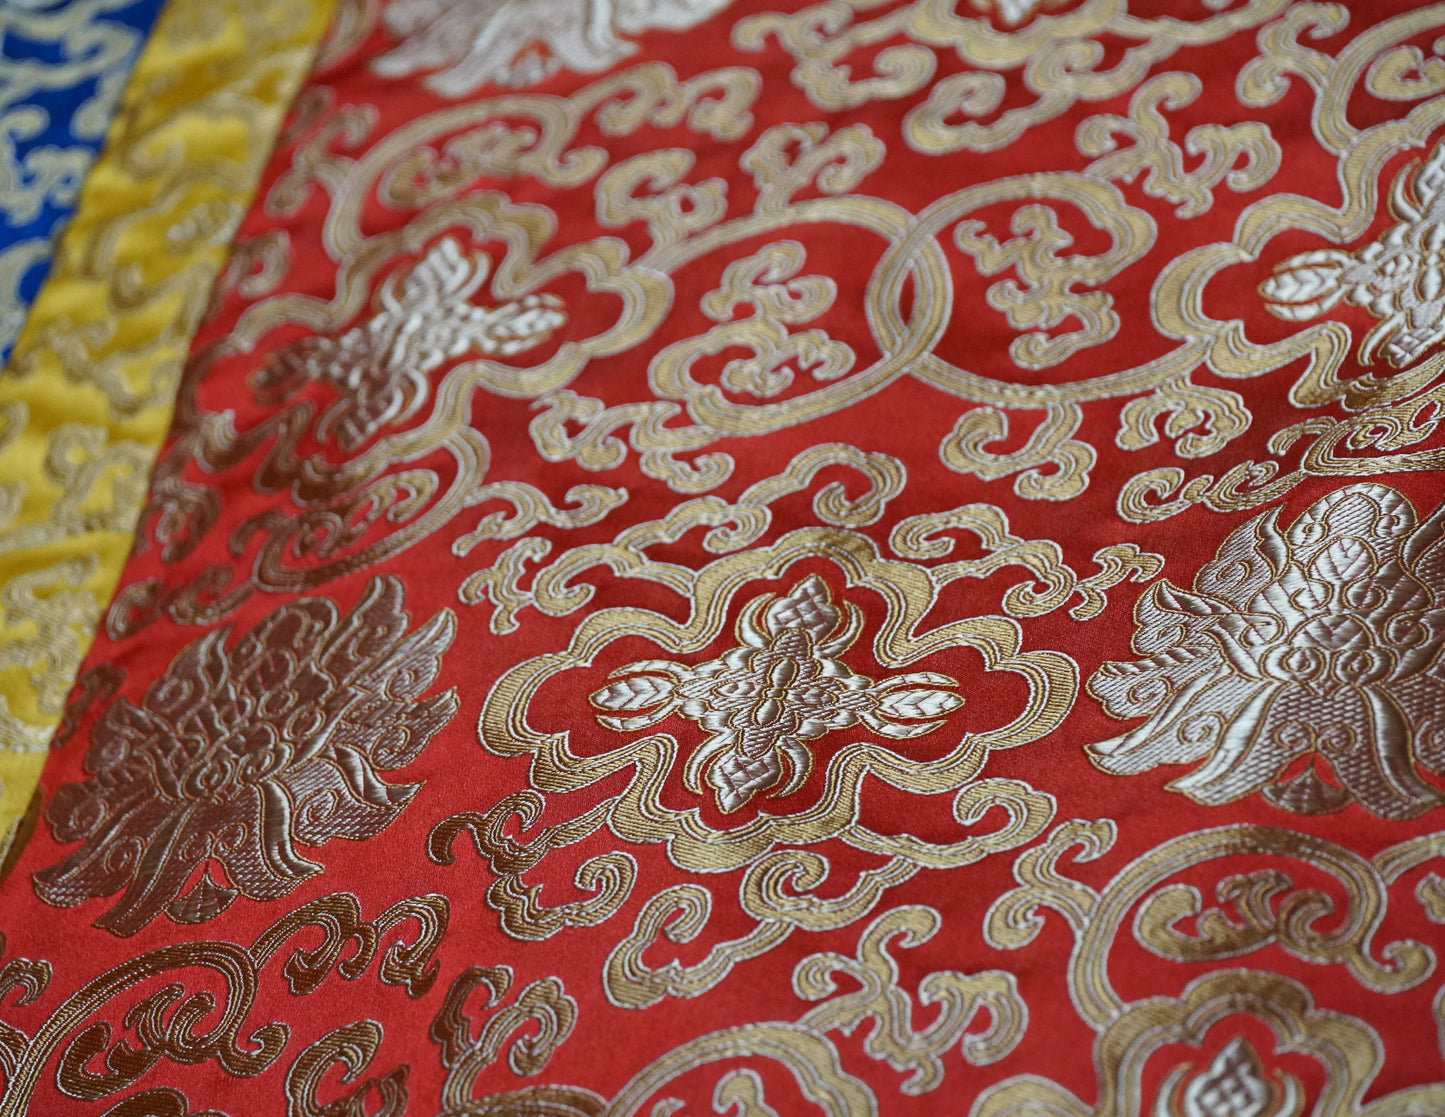 Large Table Cloth – Classic Brocade